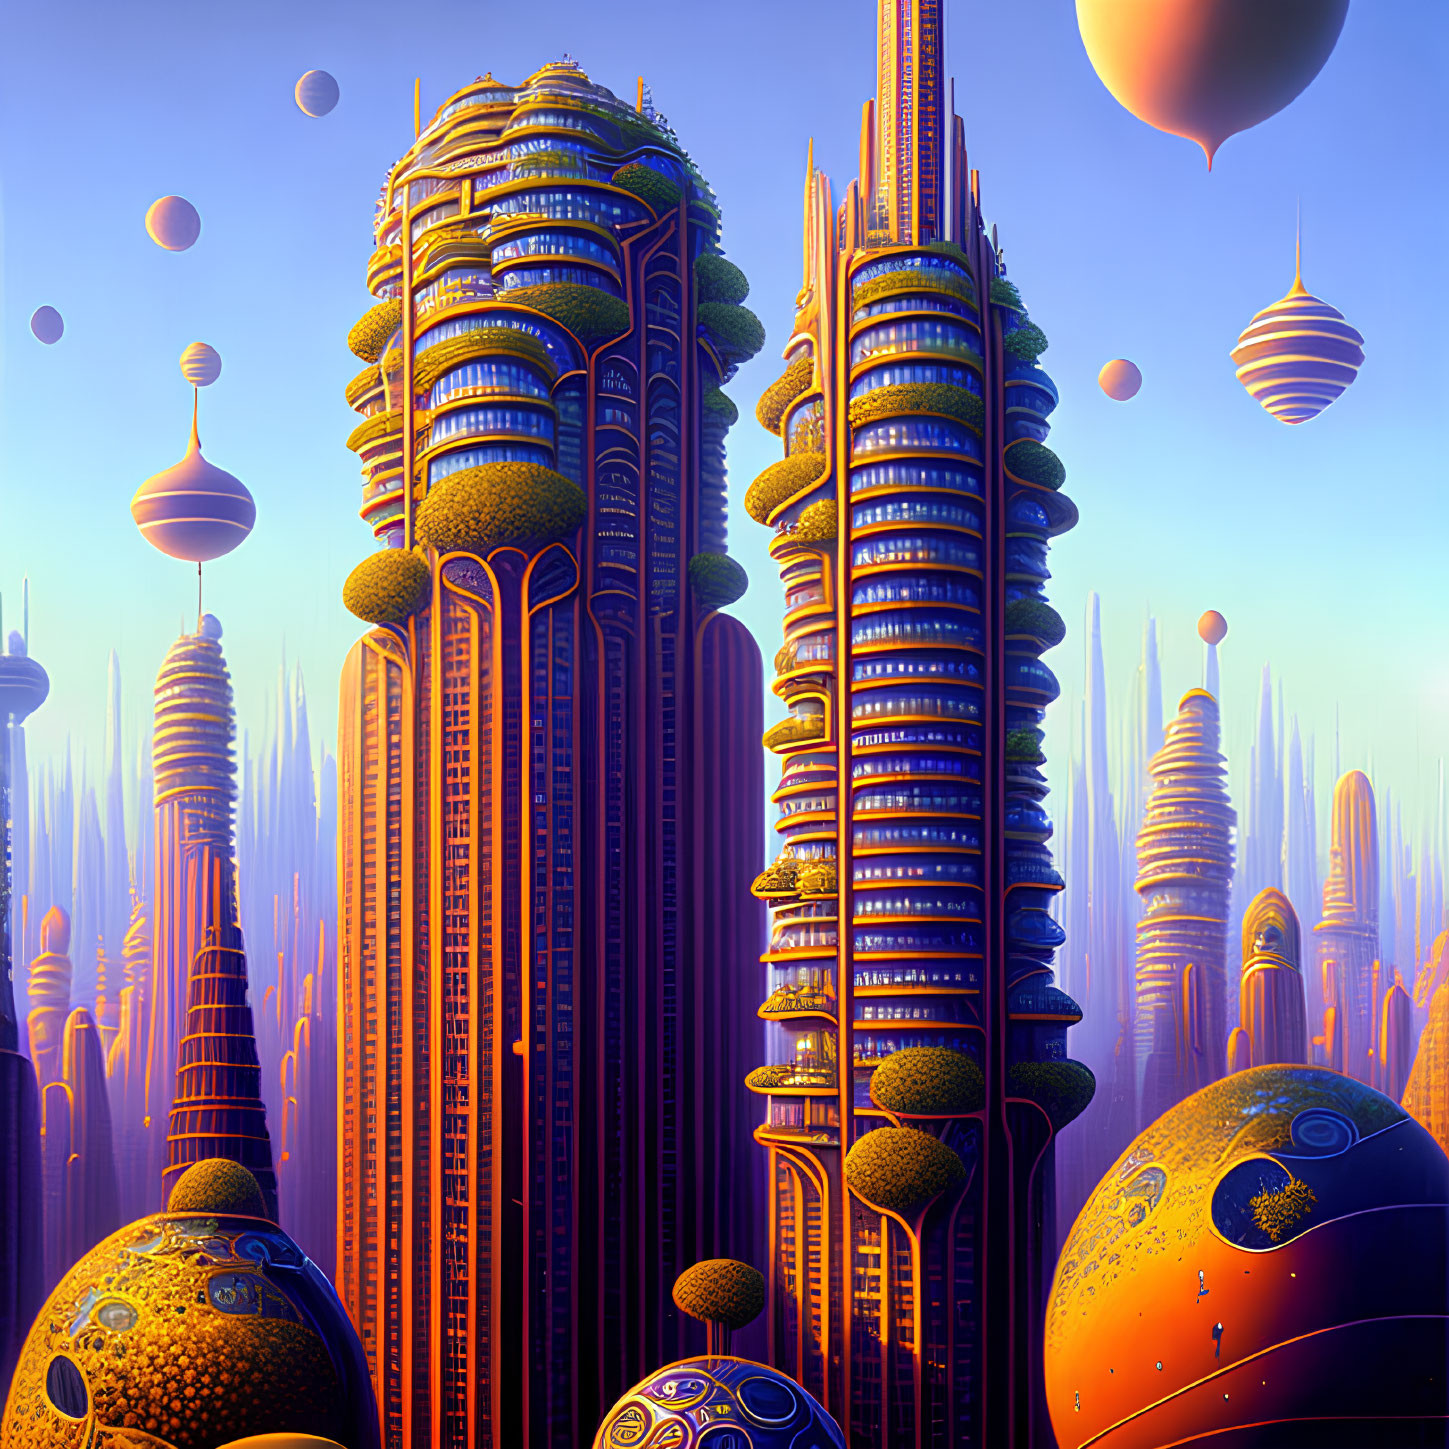 Futuristic cityscape with skyscrapers and floating orbs in purple and blue sky